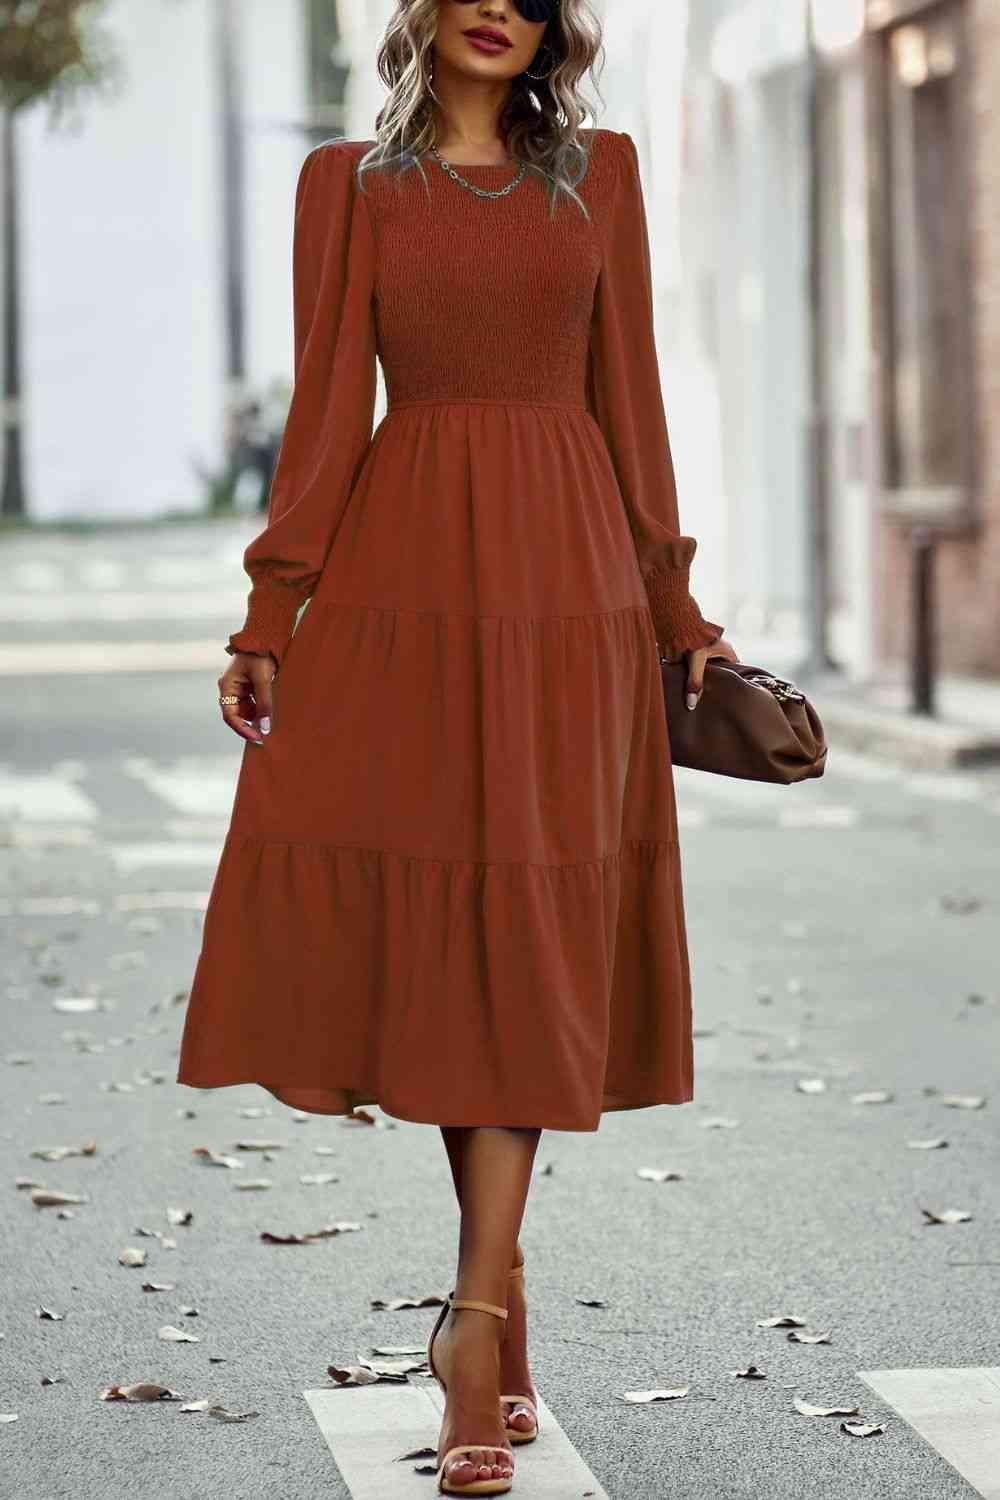 a woman in a brown dress is walking down the street